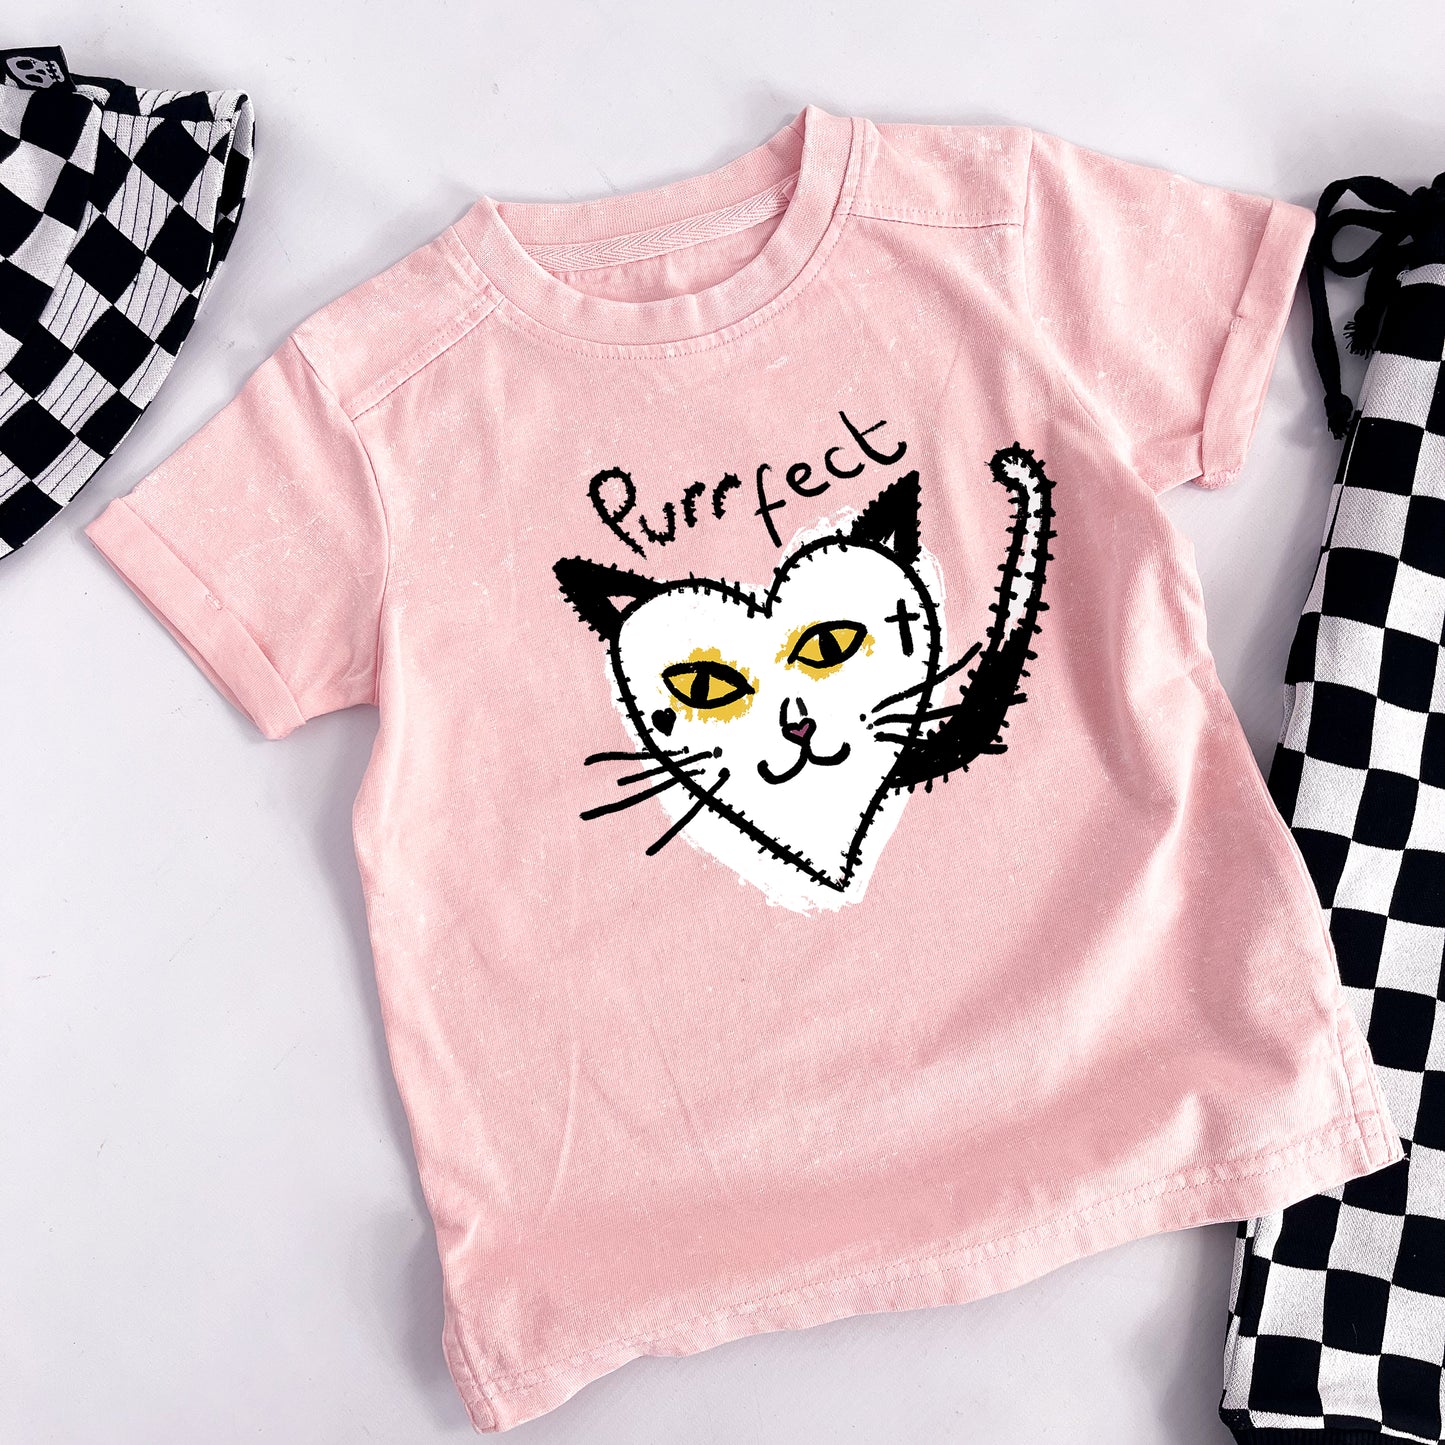 PURRFECT DISTRESSED STYLE TEE